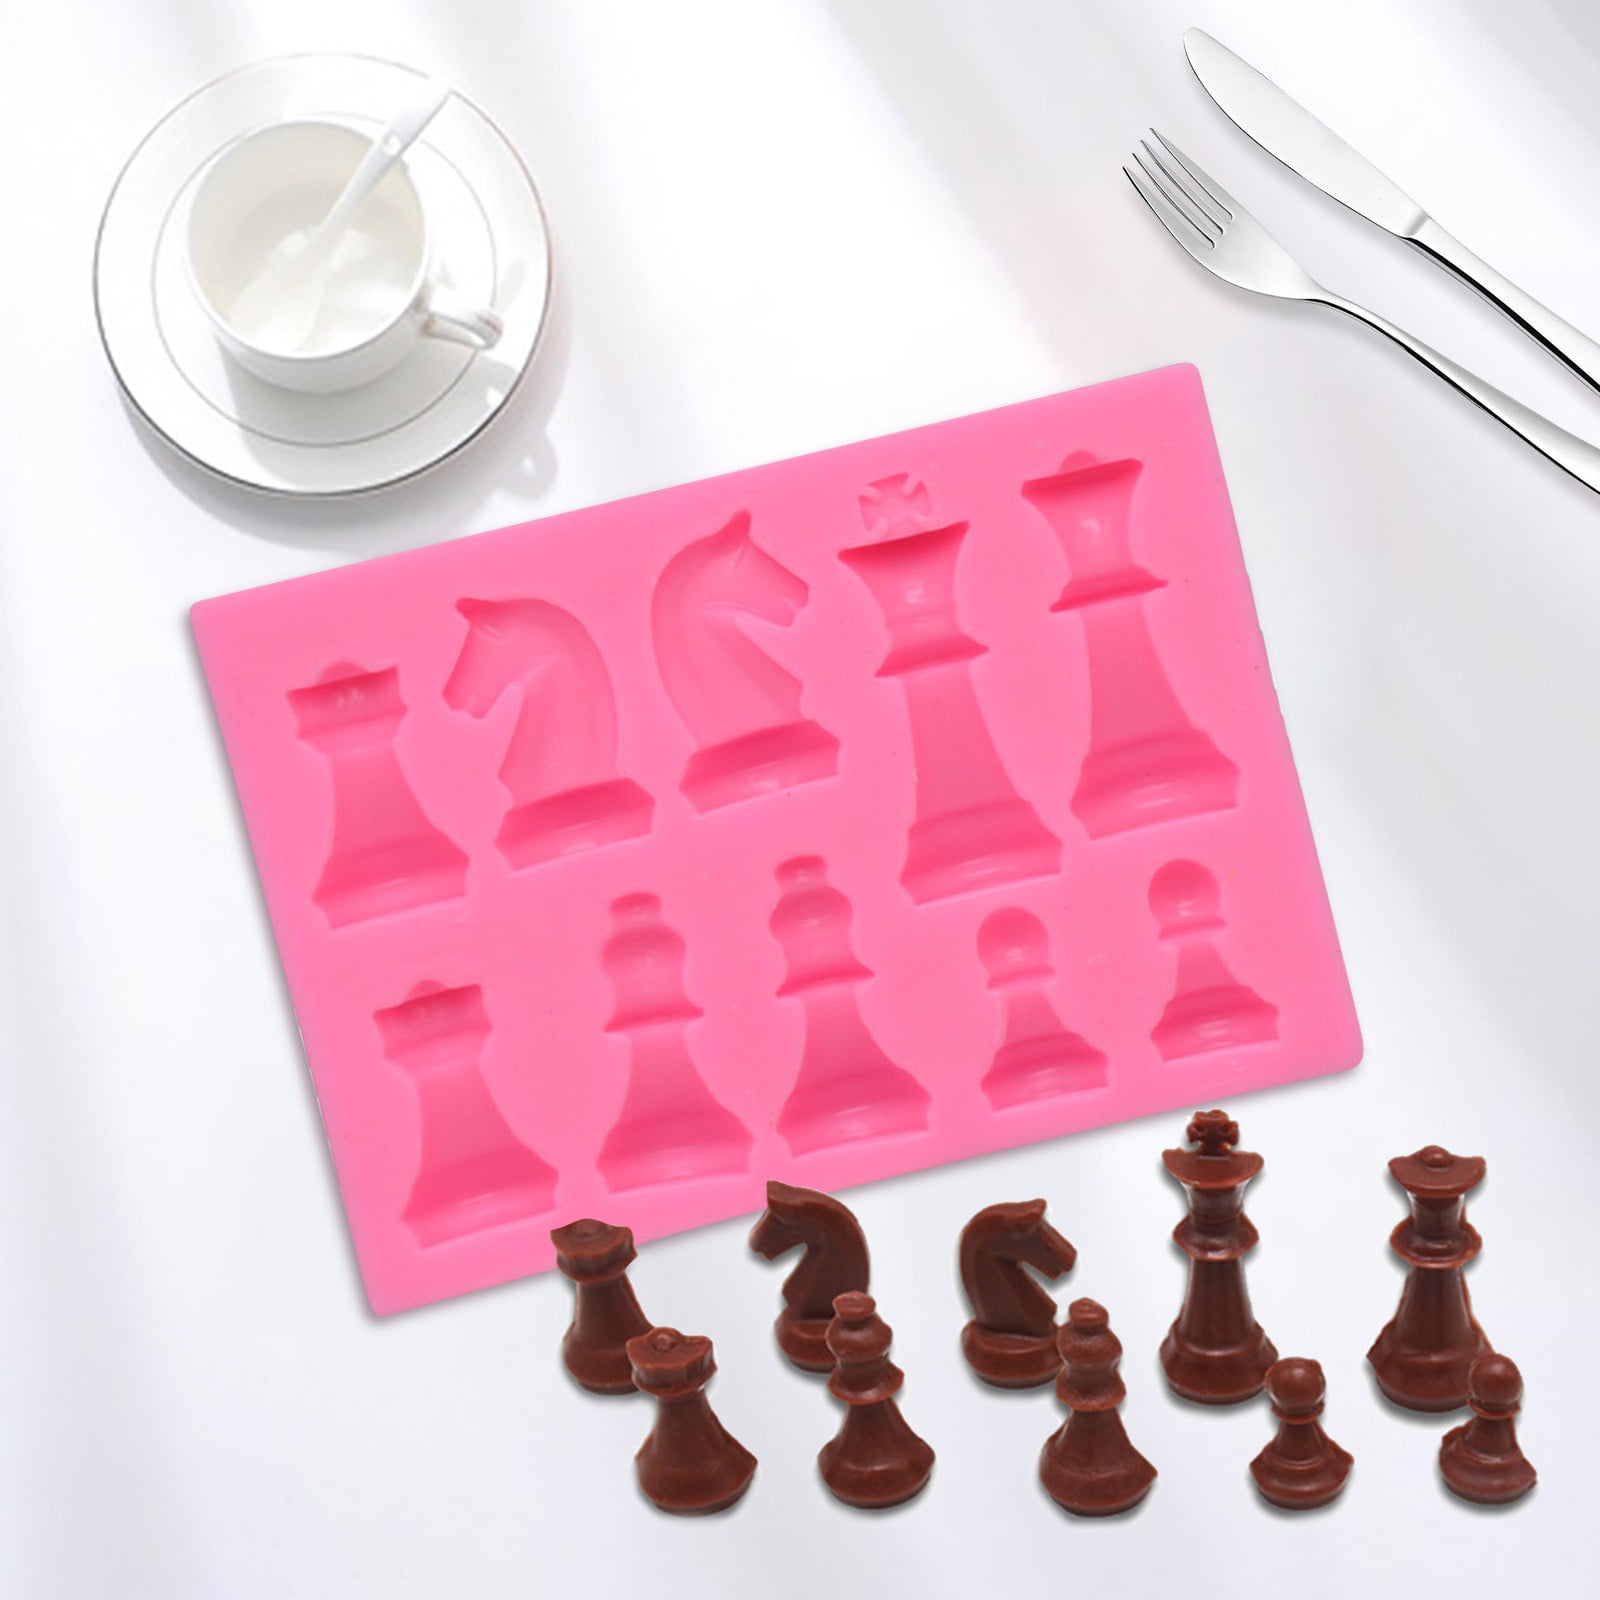 Details about   Chess Silicone Baking Mould Chocolate Mold Ice Cake Kitchen Tools Deco O0K7 